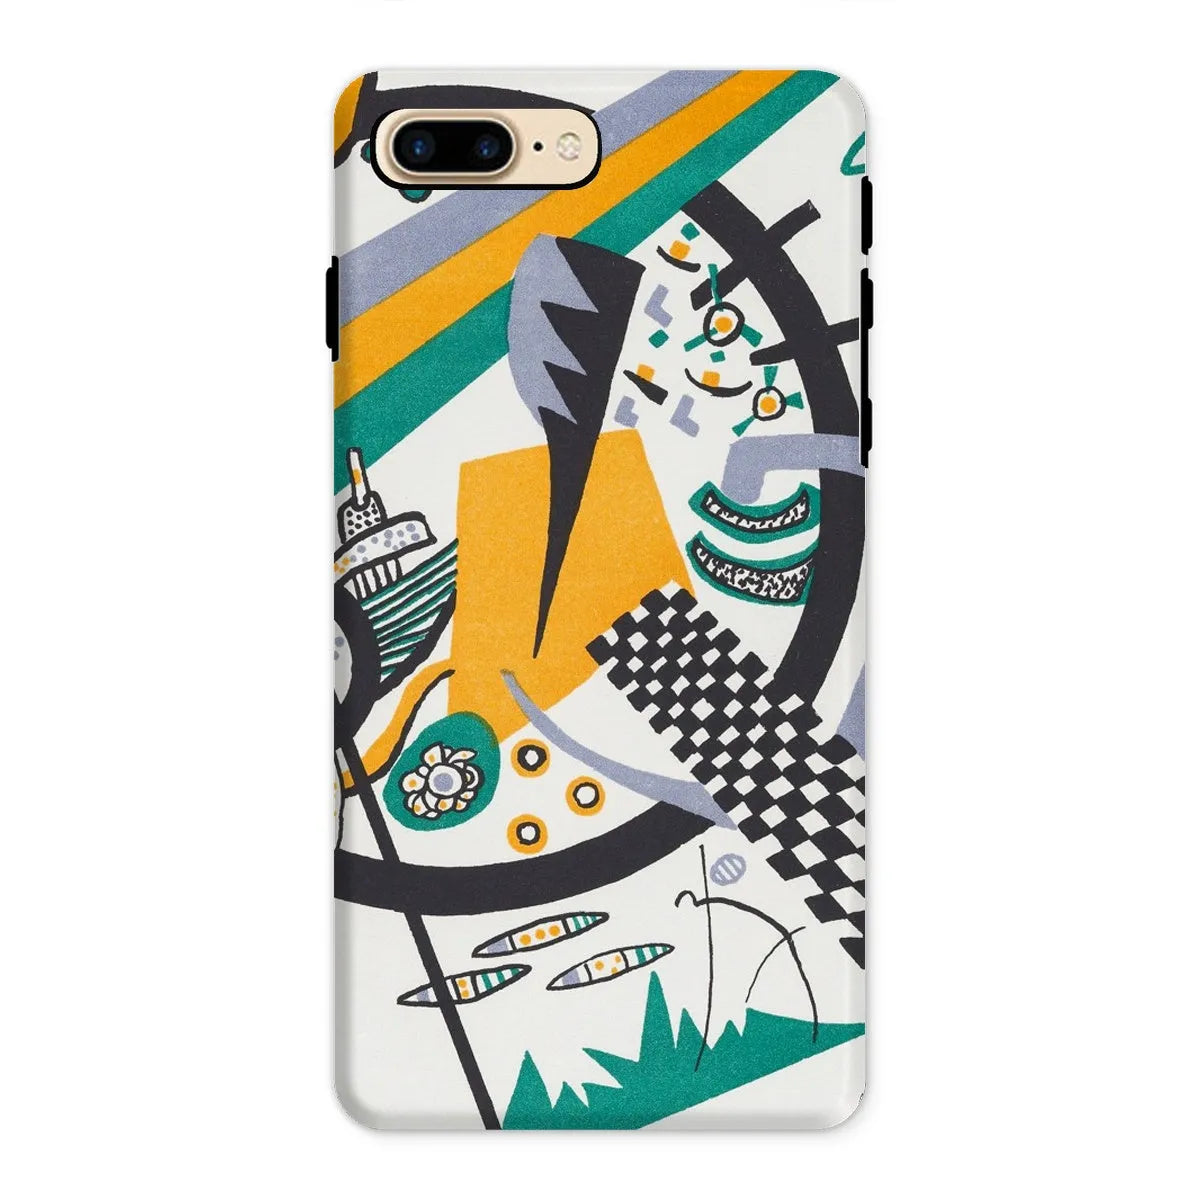 Small Worlds Iv - Expressionist Phone Case - Wassily Kandinsky - Iphone 8 Plus / Matte - Mobile Phone Cases - Aesthetic